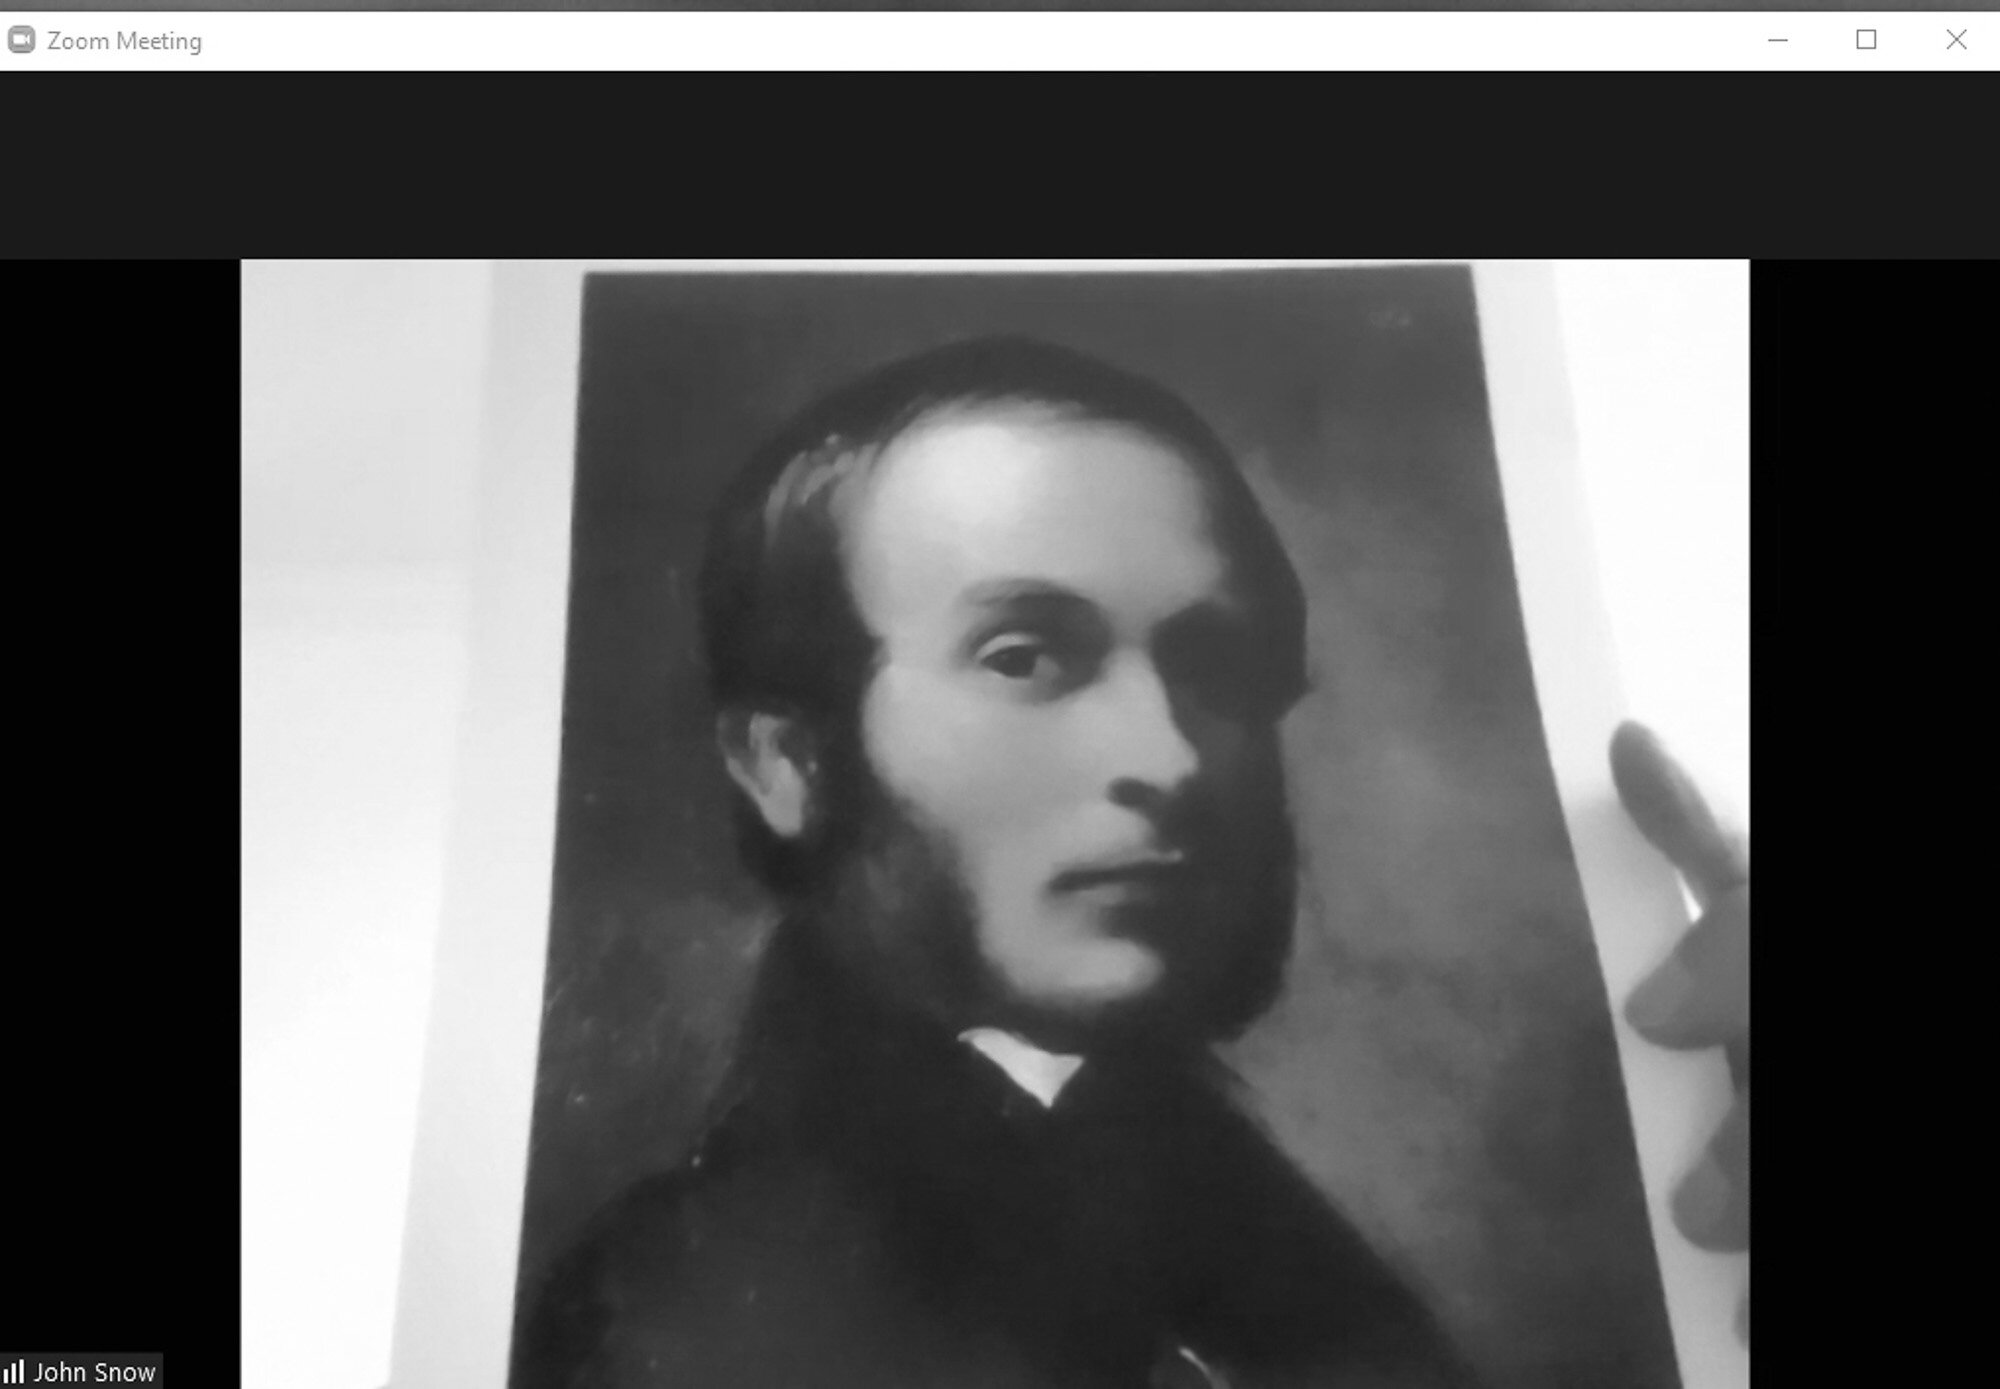 John Snow, the Father of Epidemiology on Zoom